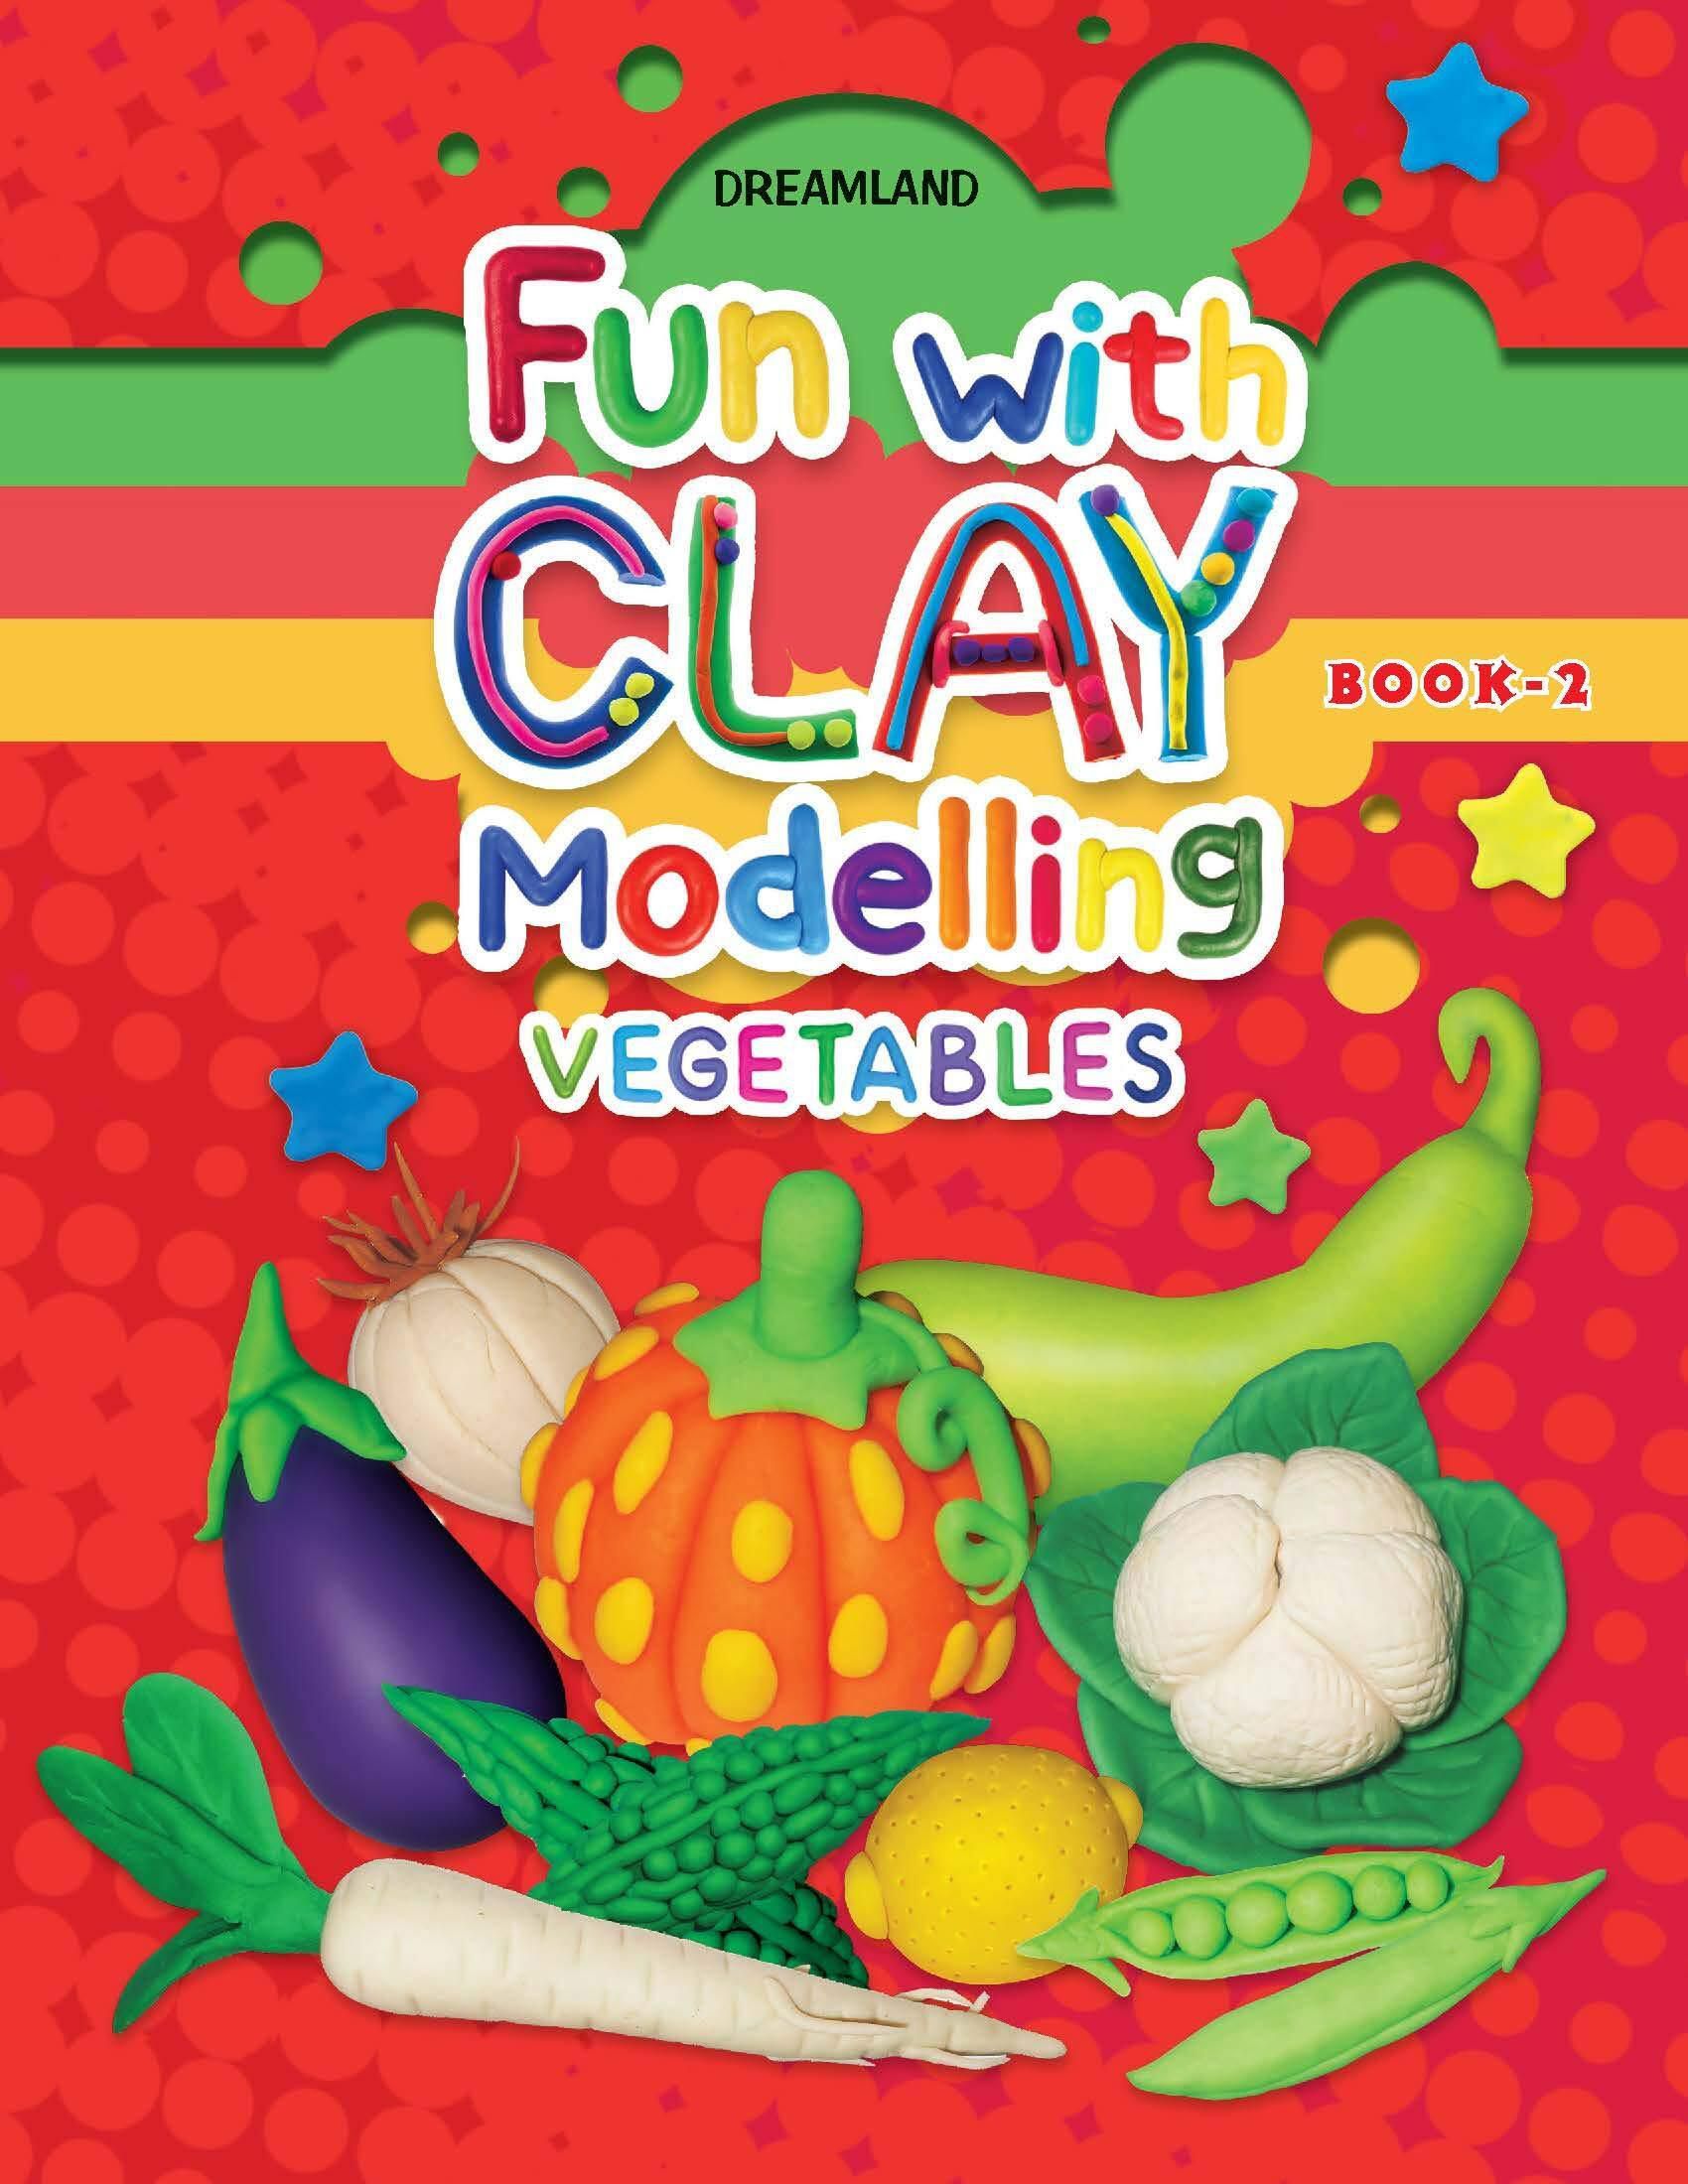 Fun with Clay Modelling Vegetables - Book 2